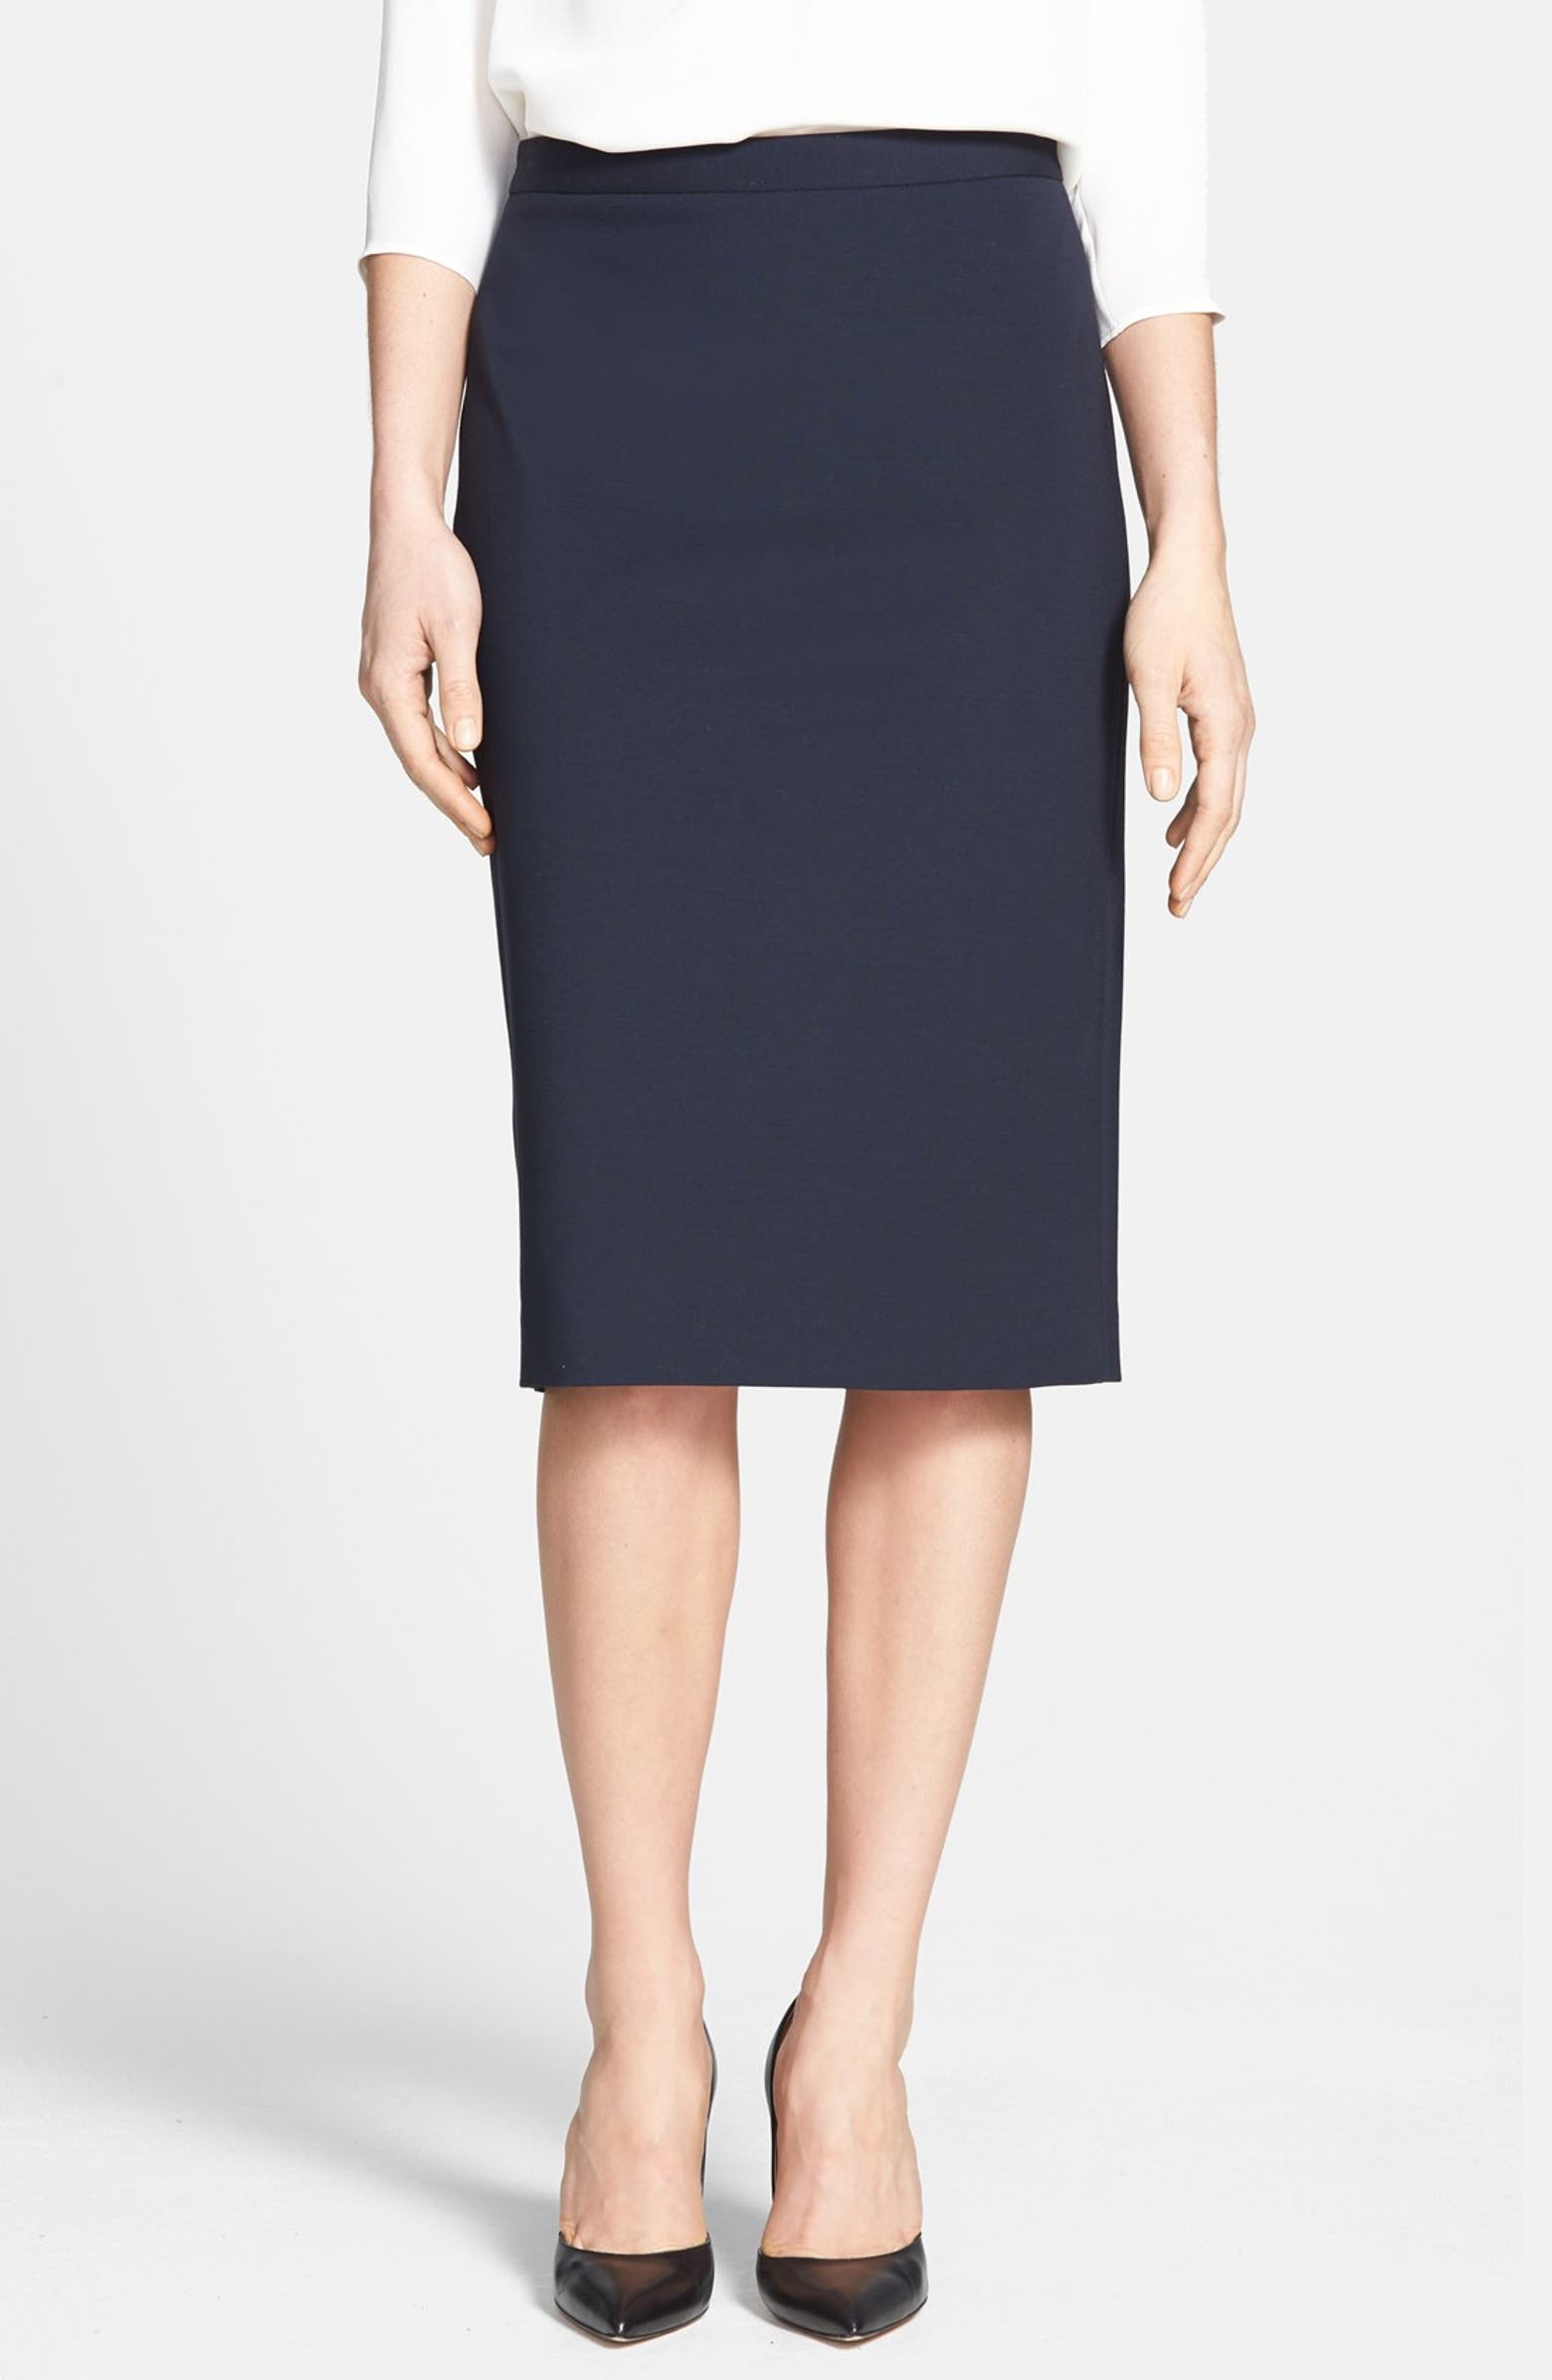 Theory 'Super' Pencil Skirt | Nordstrom